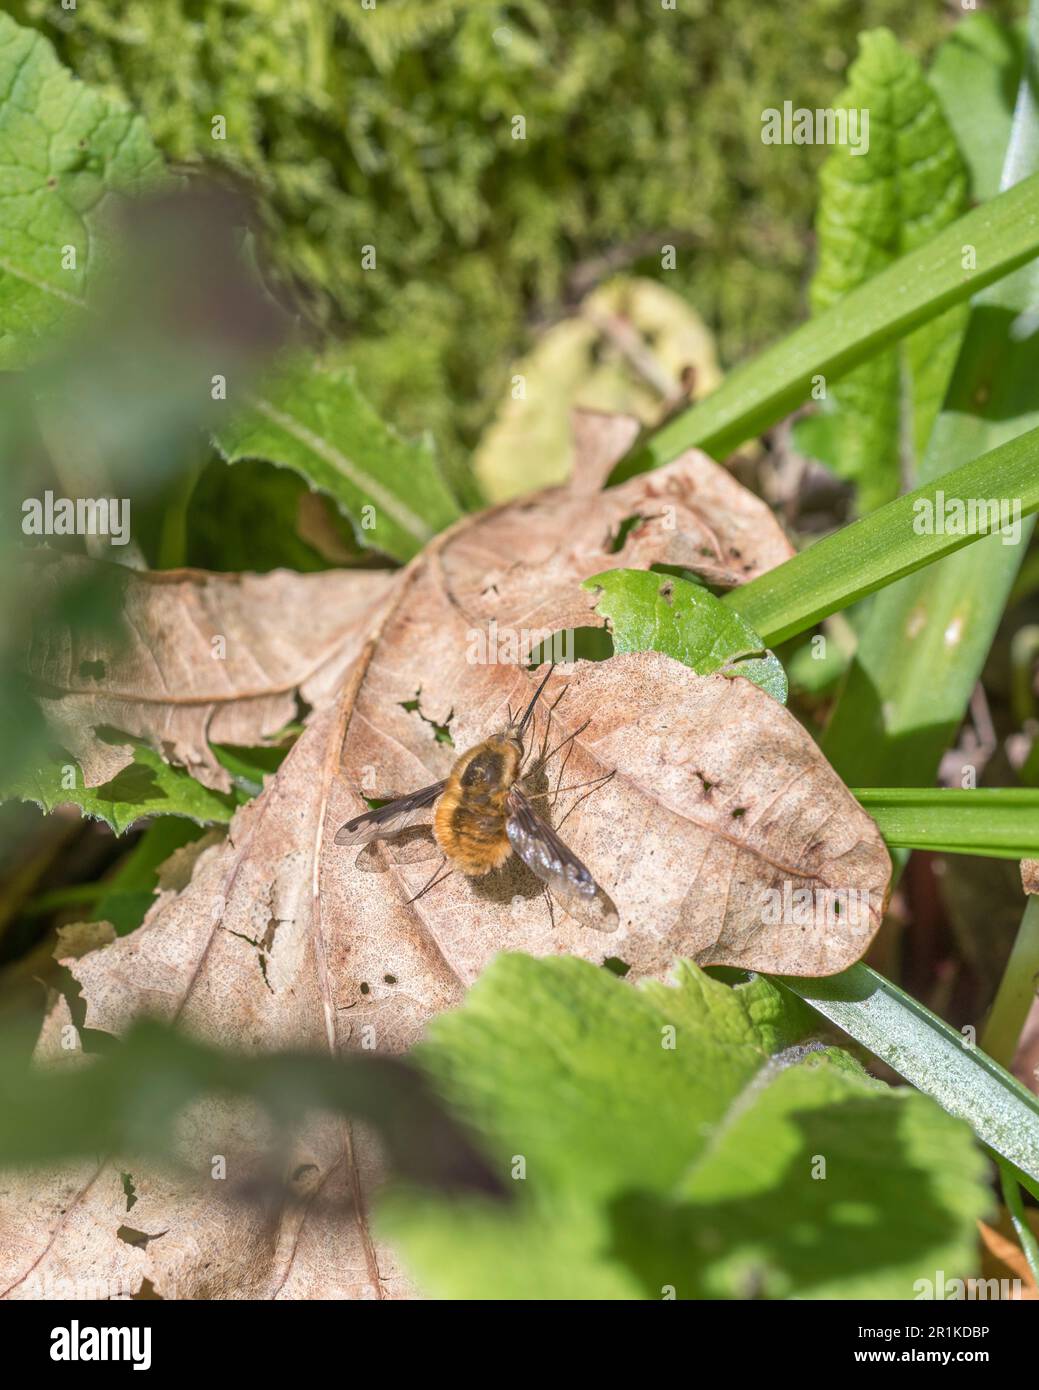 Fluffy orange Dark-Edged Bee-fly / Bombylius major resting on leaf in sunshine. Bee flies are a parasitic species, and do not sting like bees proper. Stock Photo